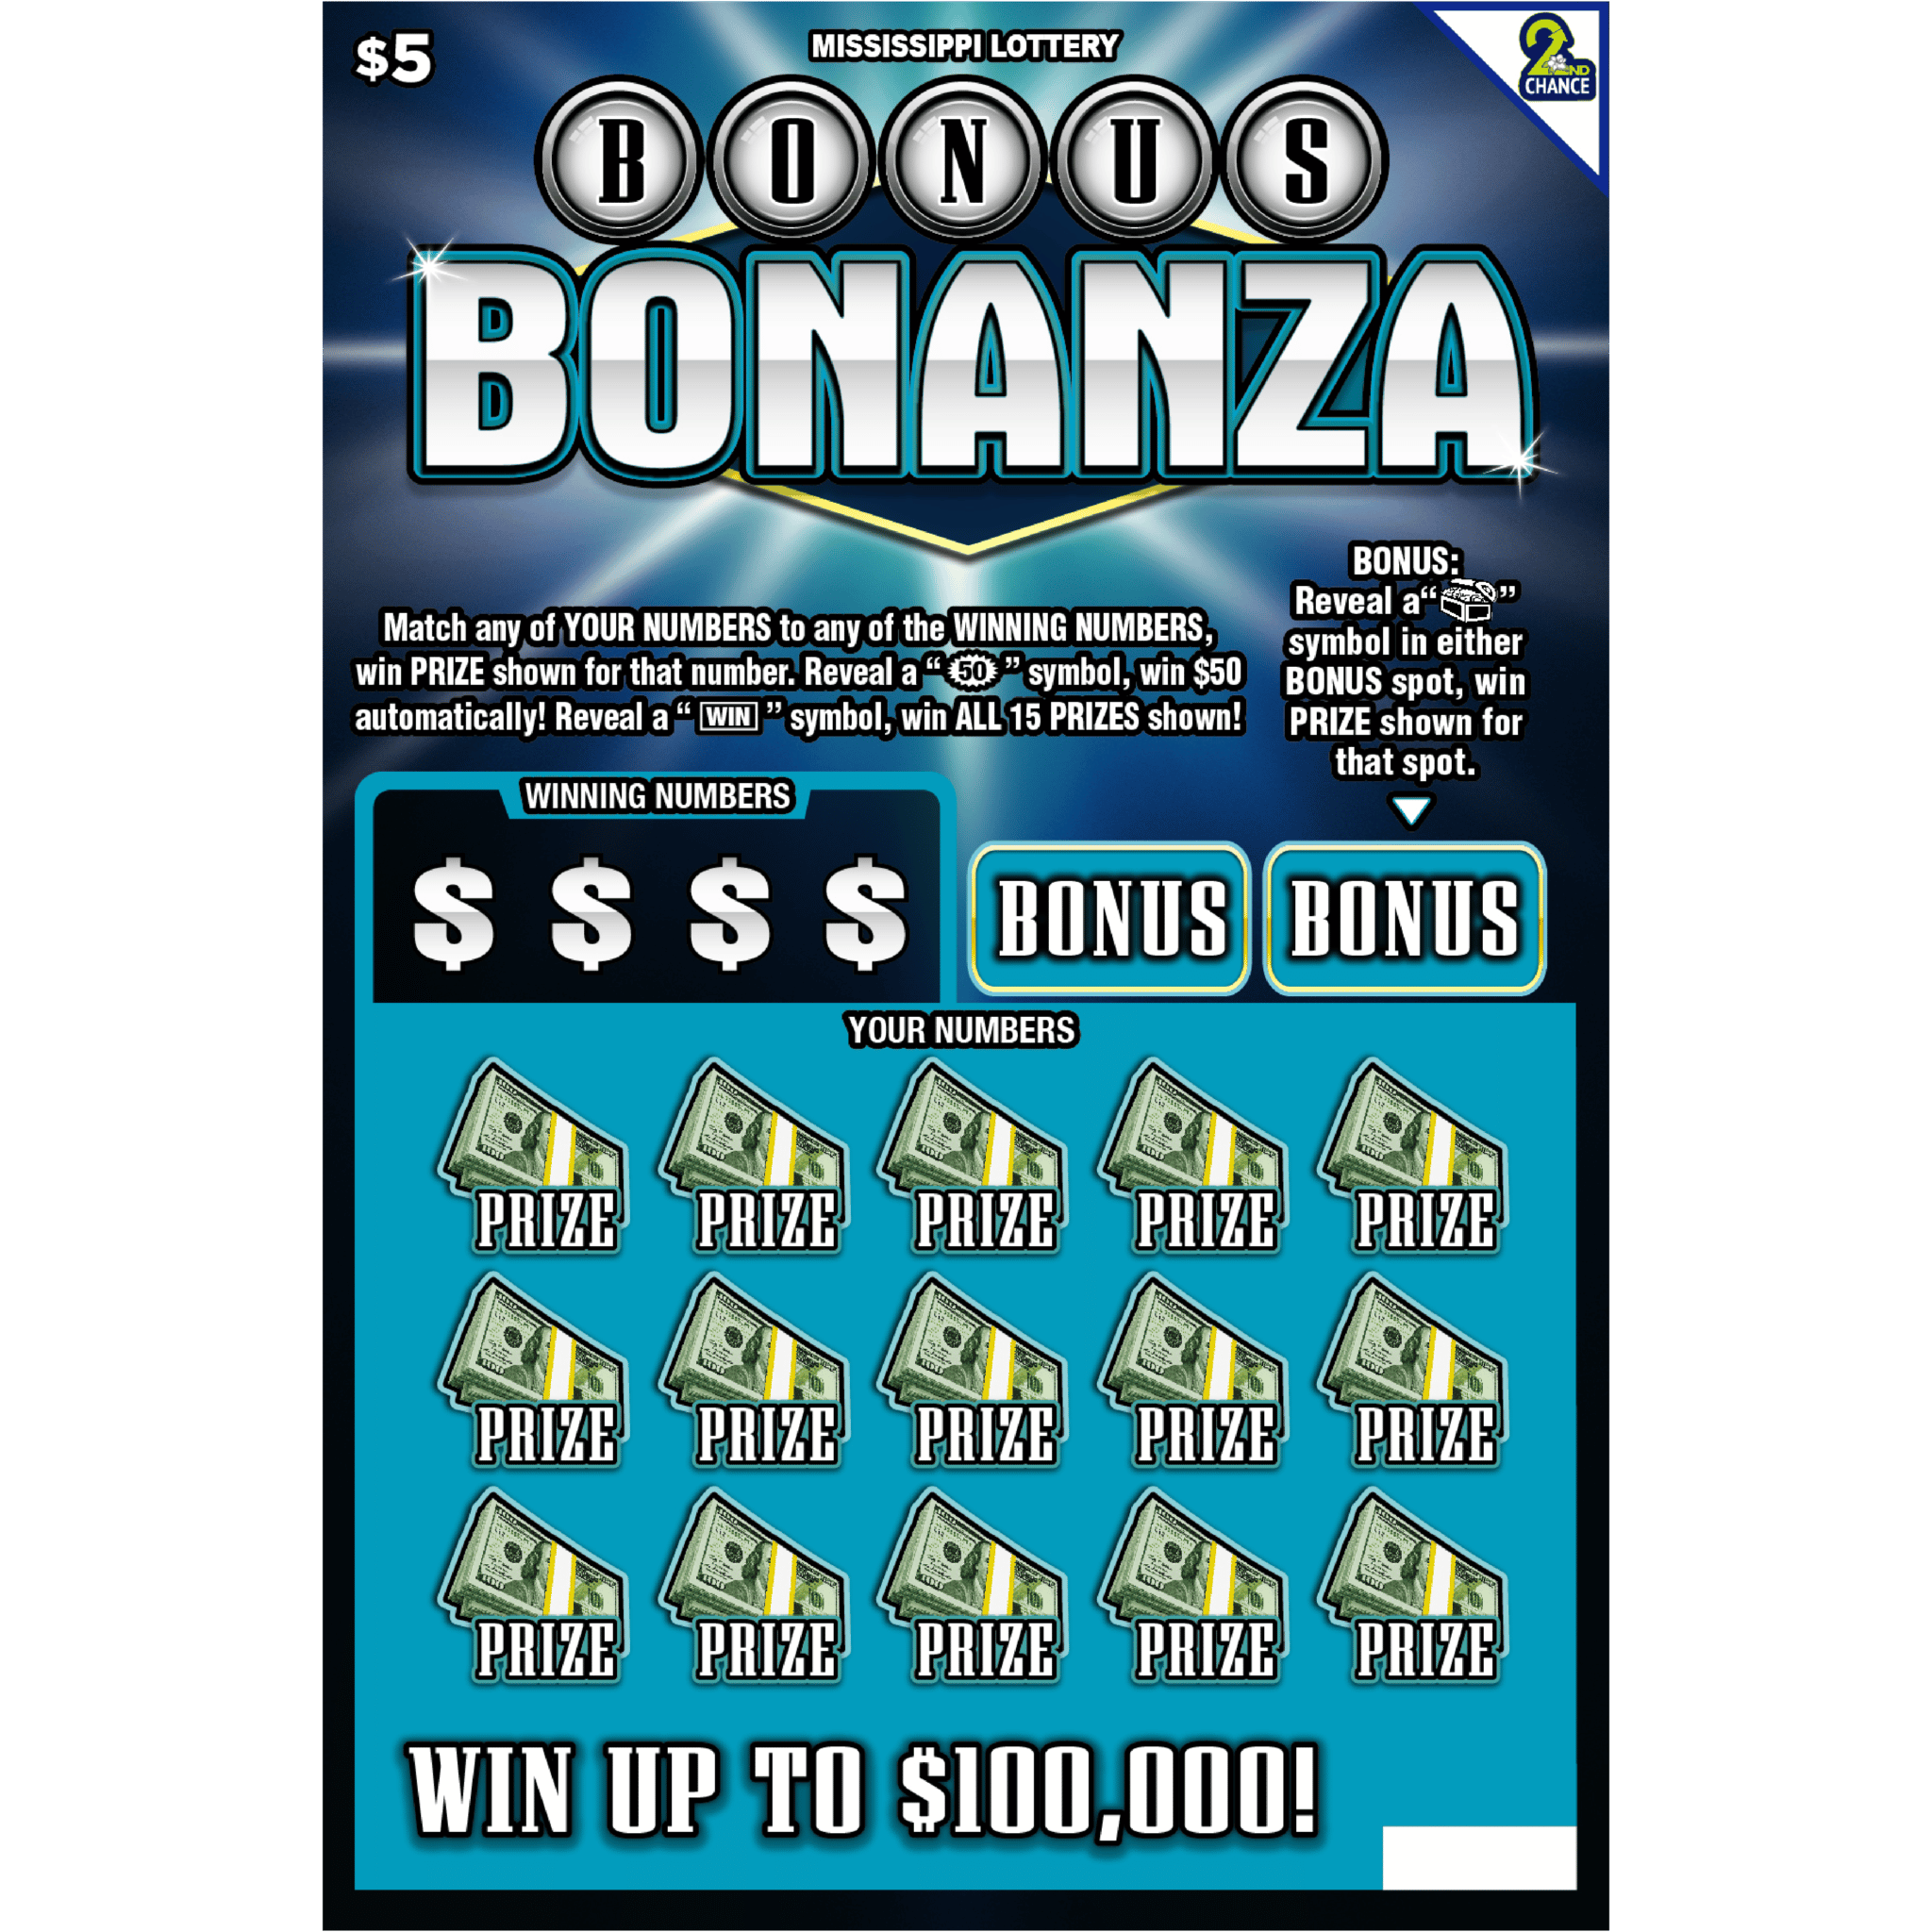 BloxFlip.com on X: 🔥 The bonanza continues! 🔥 Week 3 code is here! Use  'bonanza30' for a chance to win! 🎁 But hurry, it's limited to the first  2000 claims. Ready, set